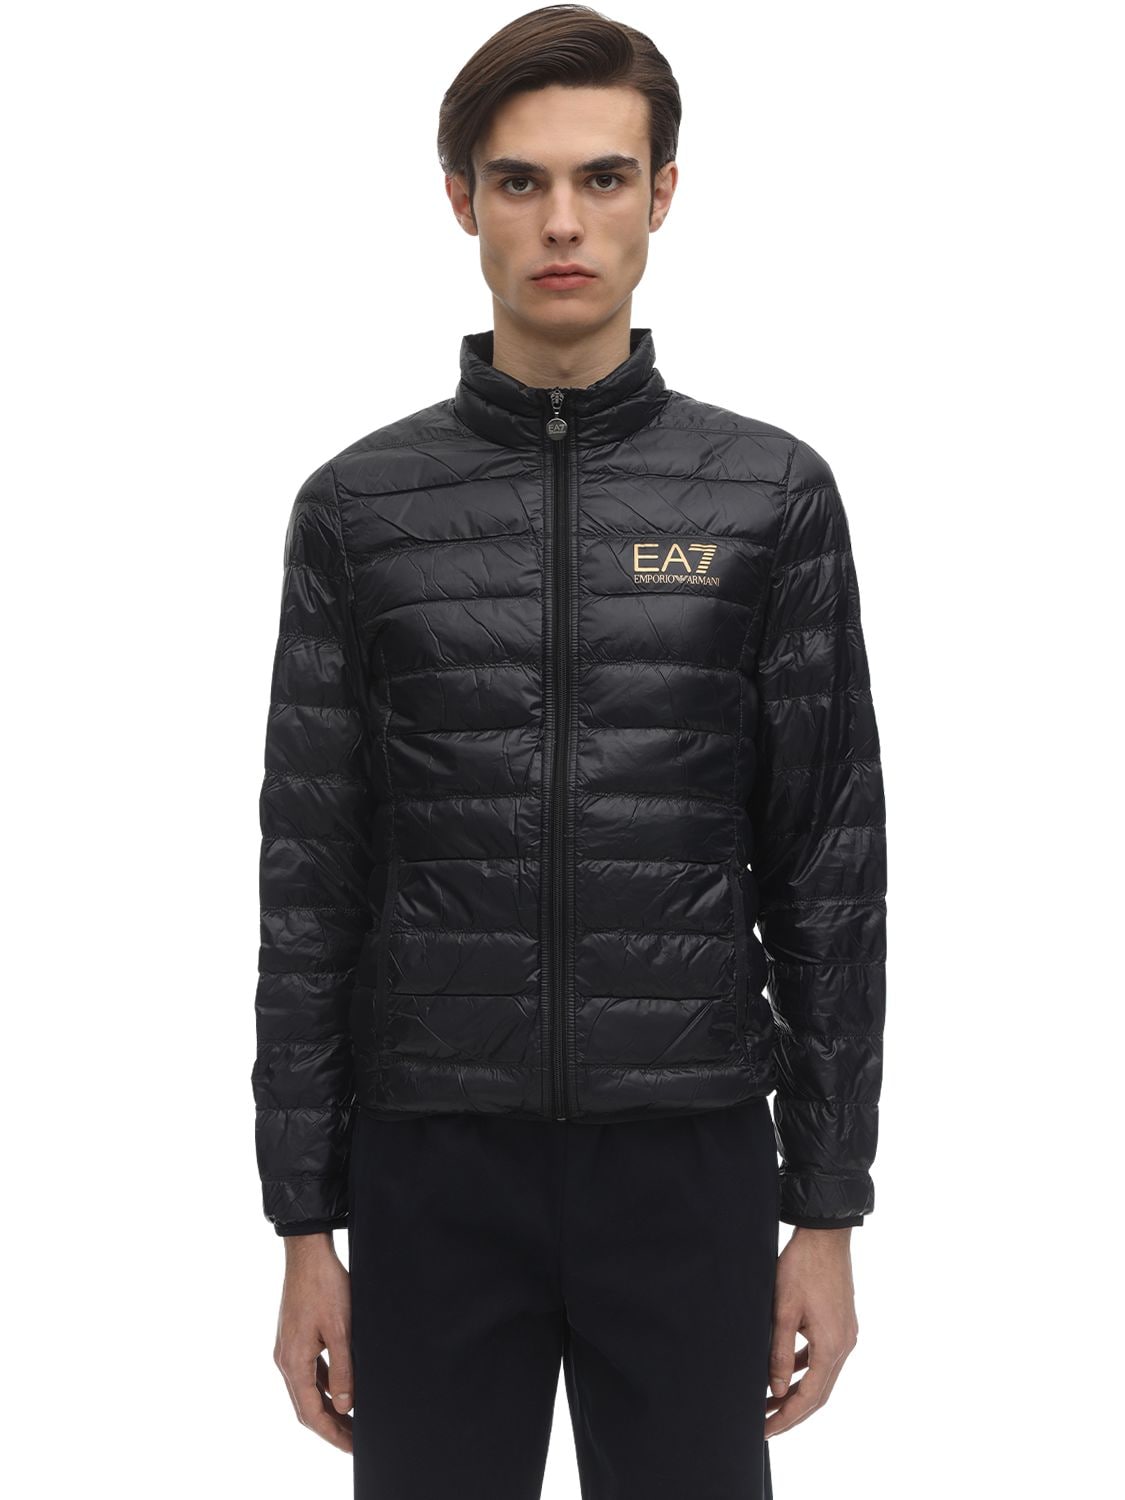 Ea7 Core Identity Packable Nylon Down Jacket In Black,gold